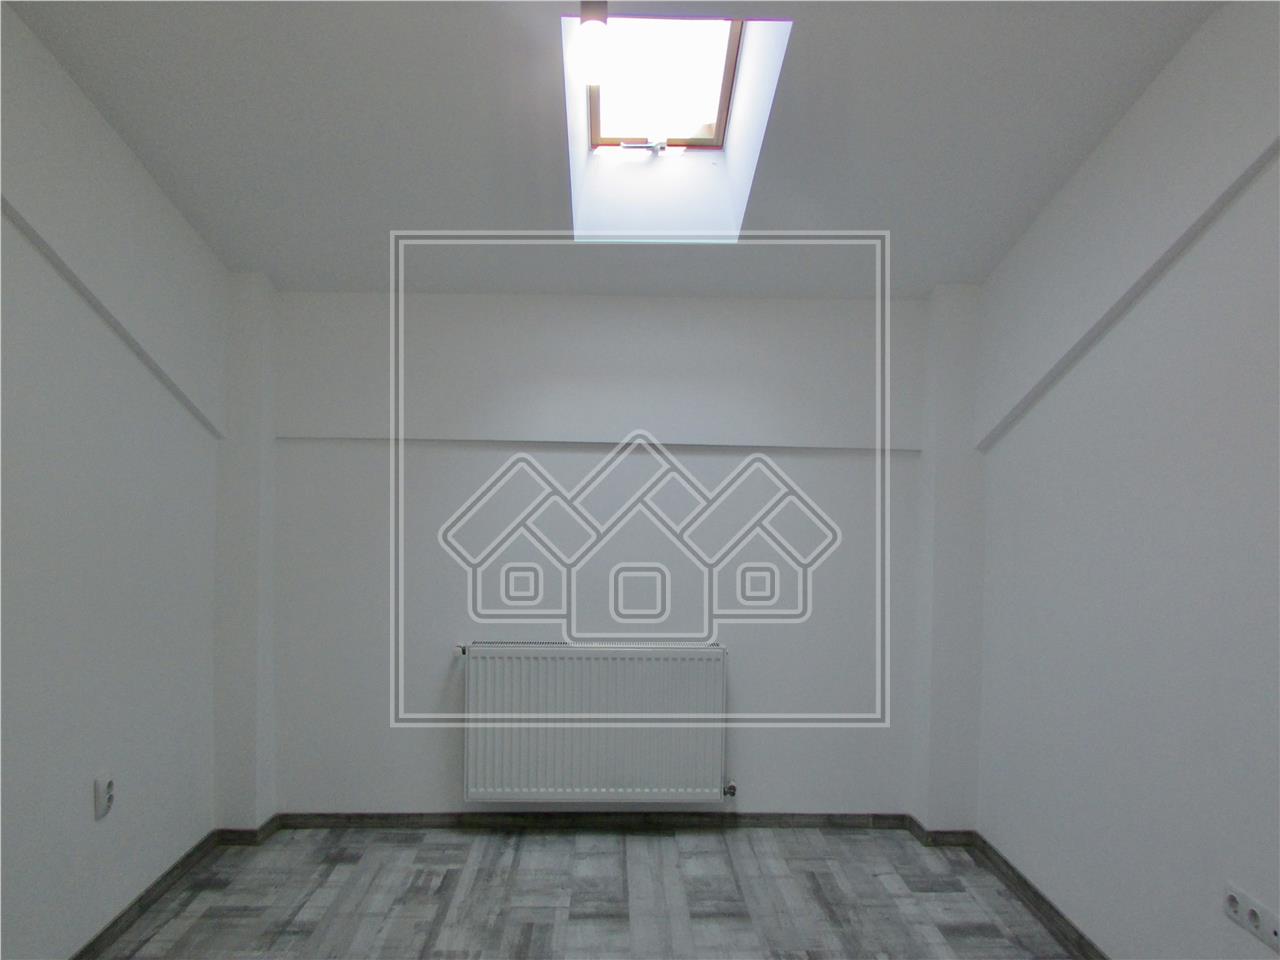 Apartment for sale in Sibiu - 3 rooms - and attic - finished to order